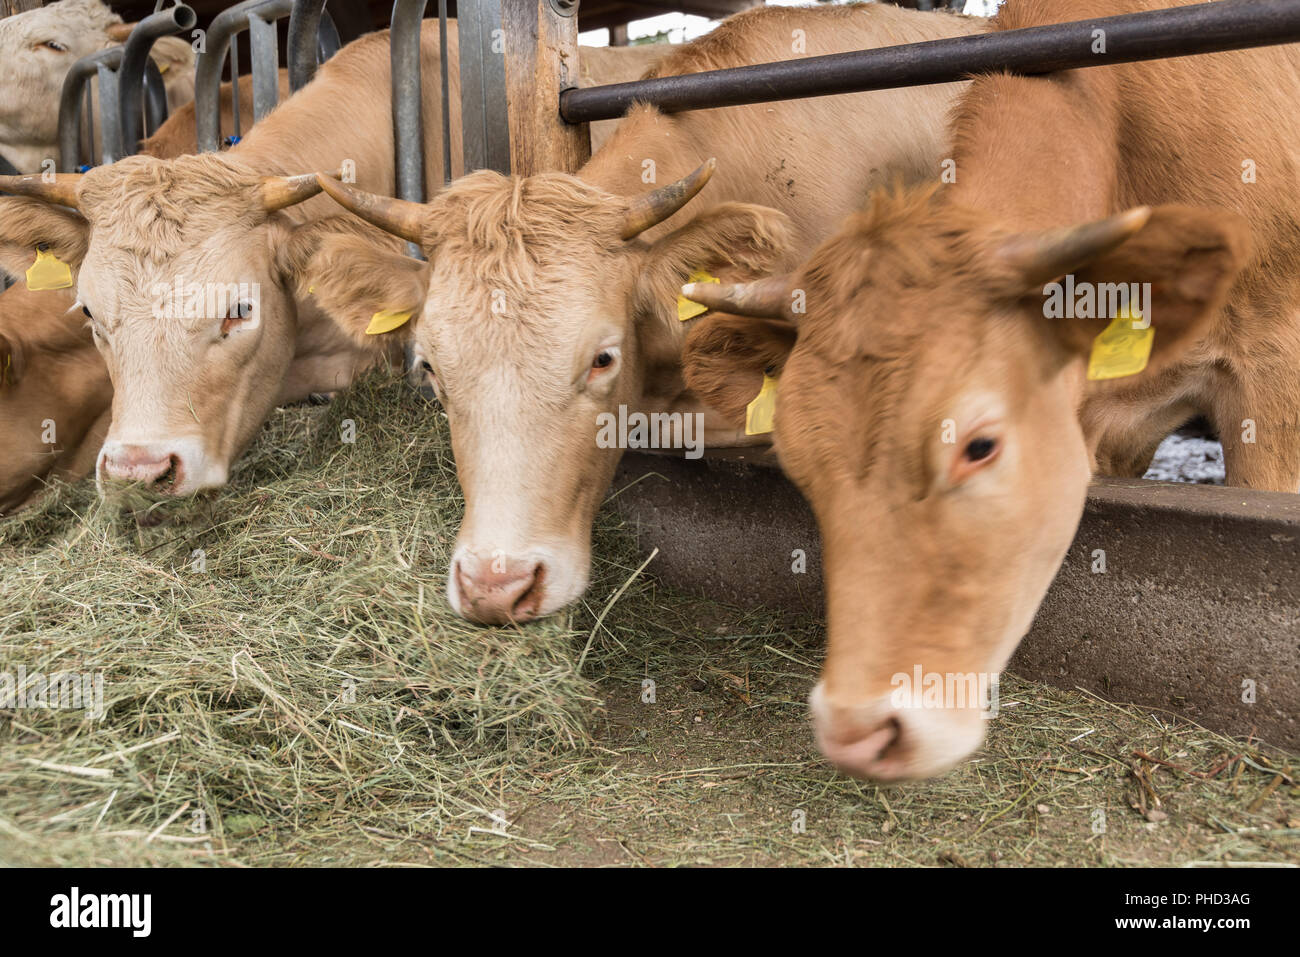 Cows eating hay in the stable - close-up cattle keeping Stock Photo